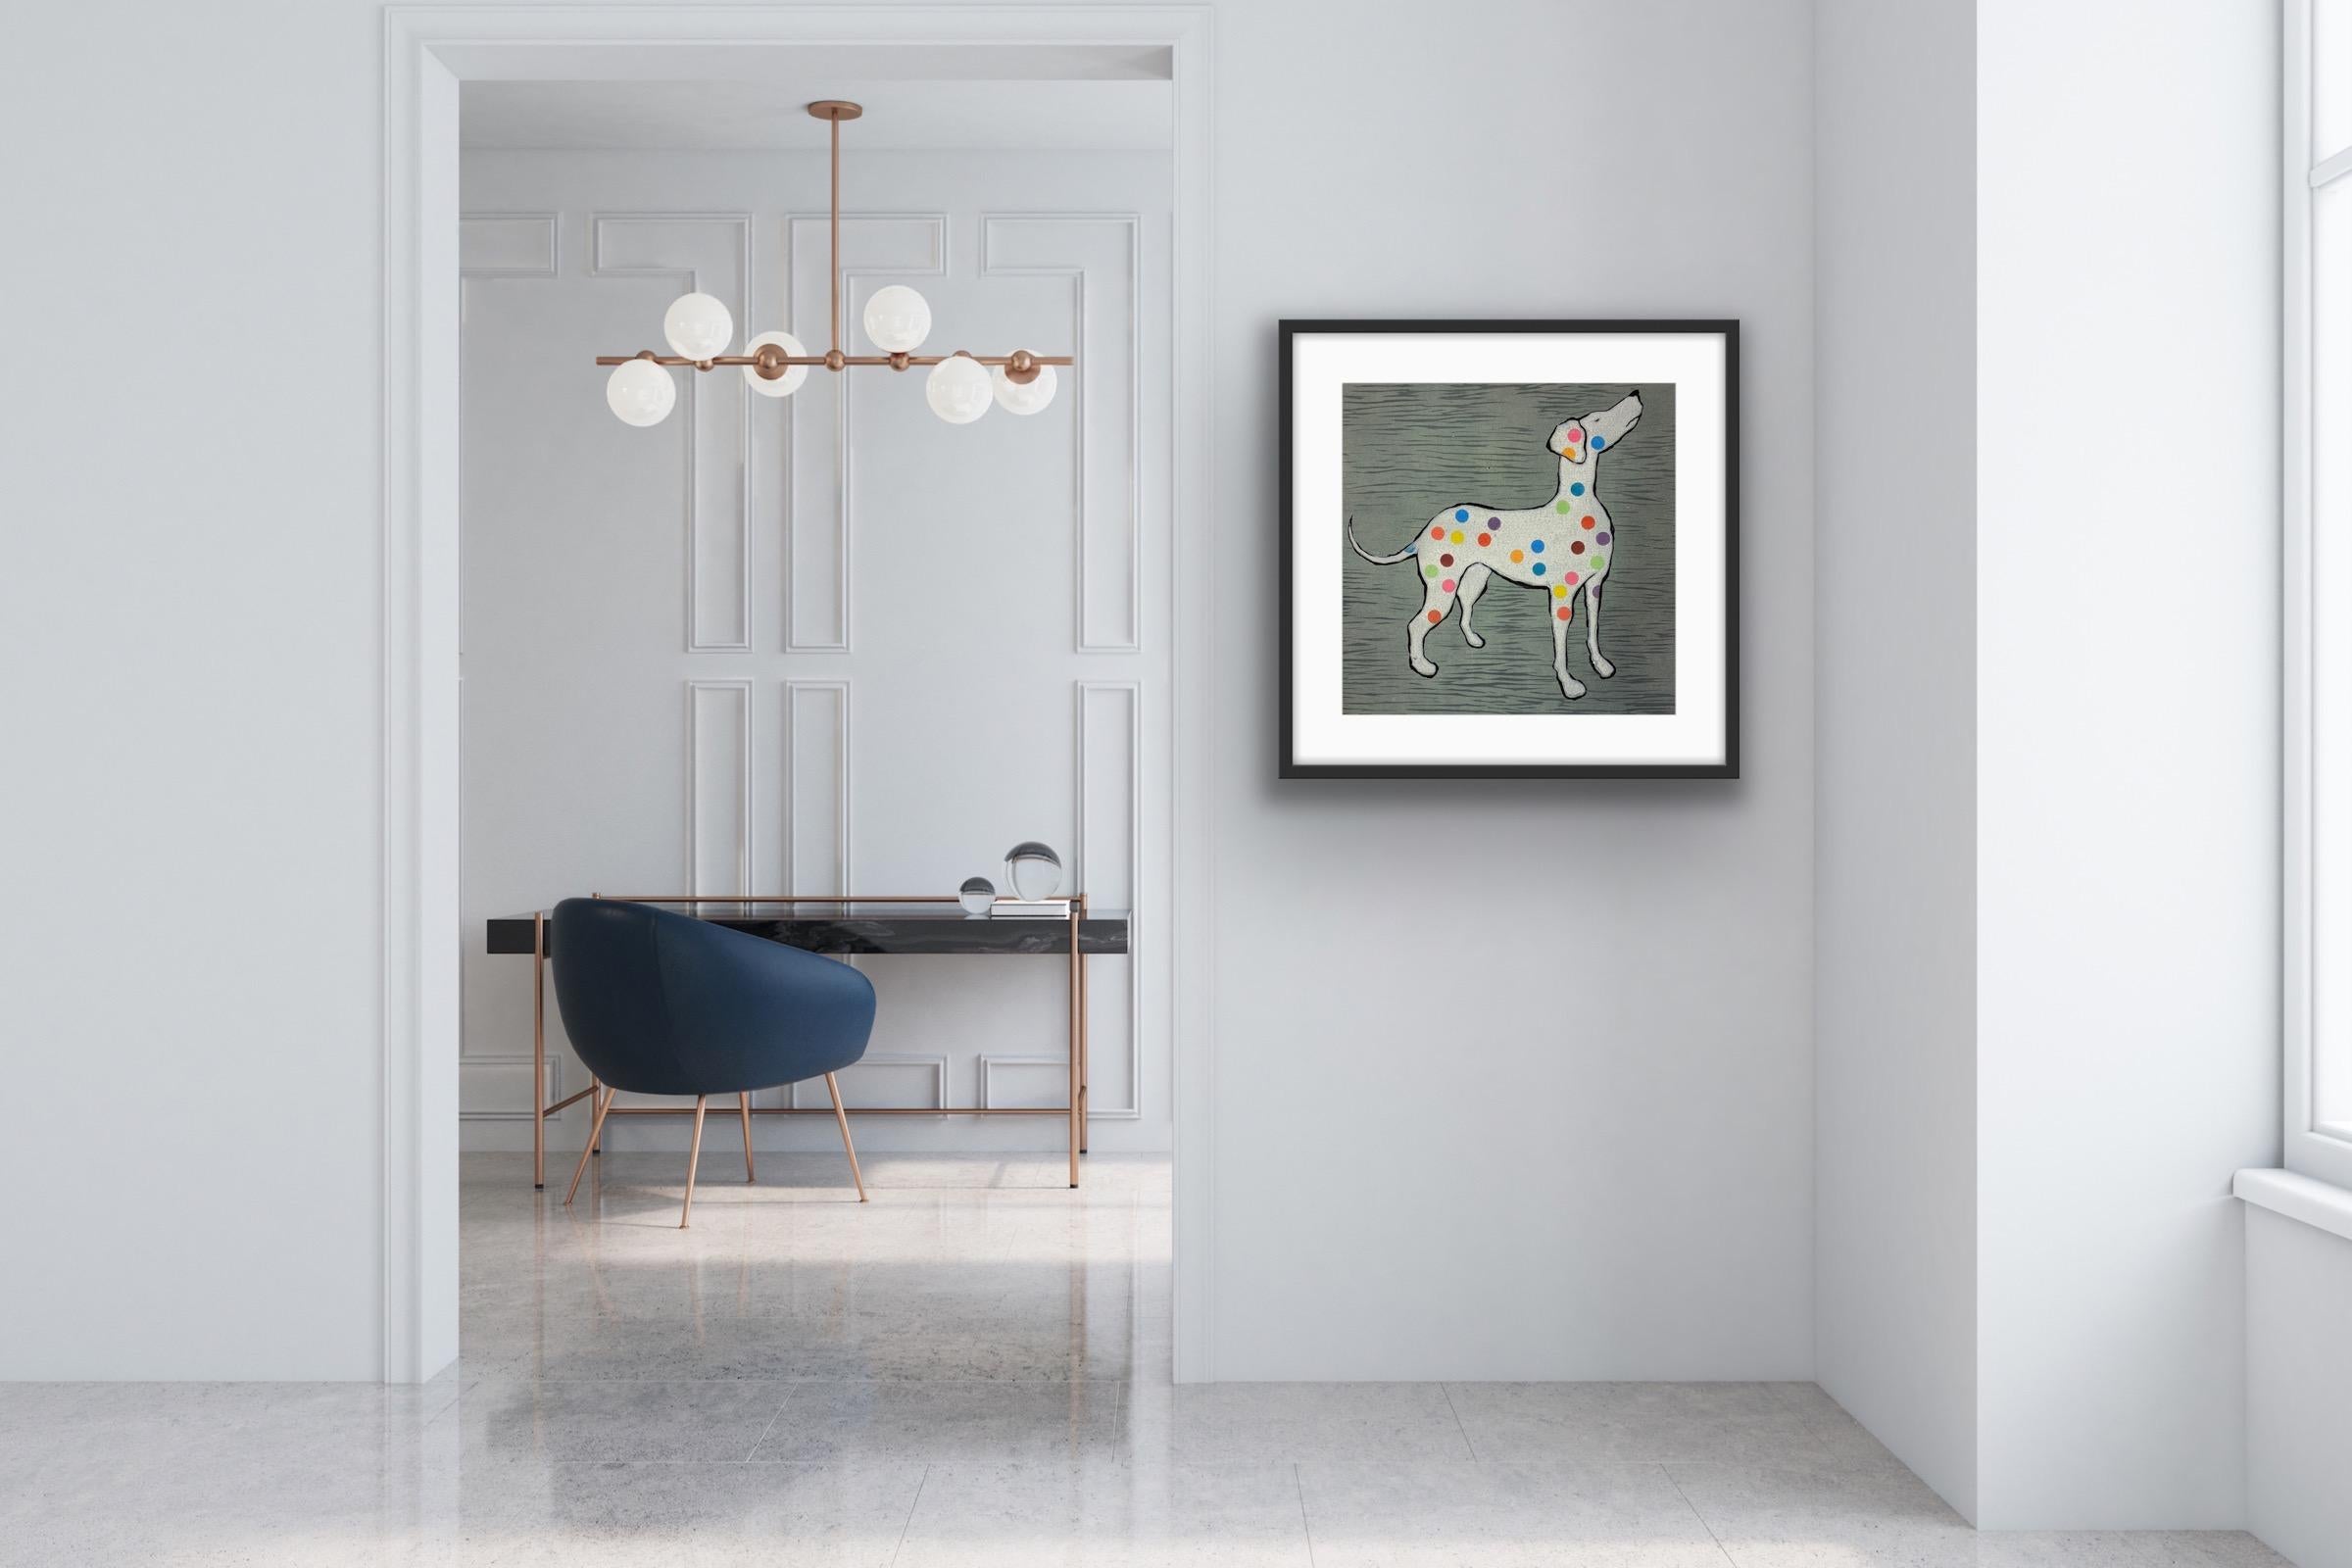 Damien Hirst's Dog, Pictures of Famous Artist's Pets, Damien Hirst Spots Style - Contemporary Print by Mychael Barratt